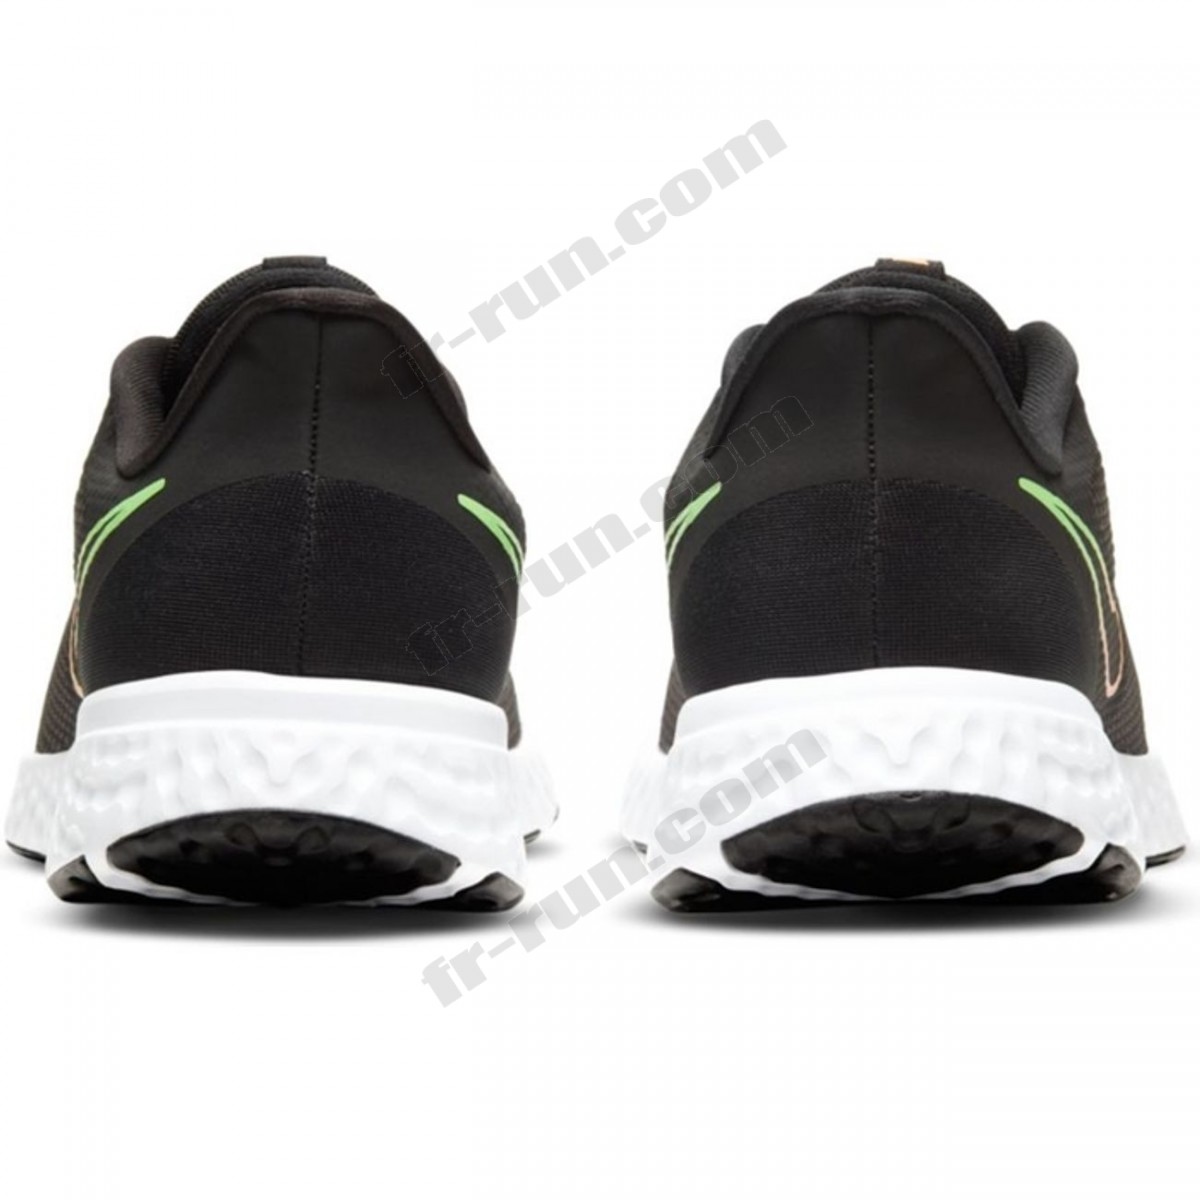 Nike/CHAUSSURES BASSES running homme NIKE NIKE REVOLUTION 5 √ Nouveau style √ Soldes - -4